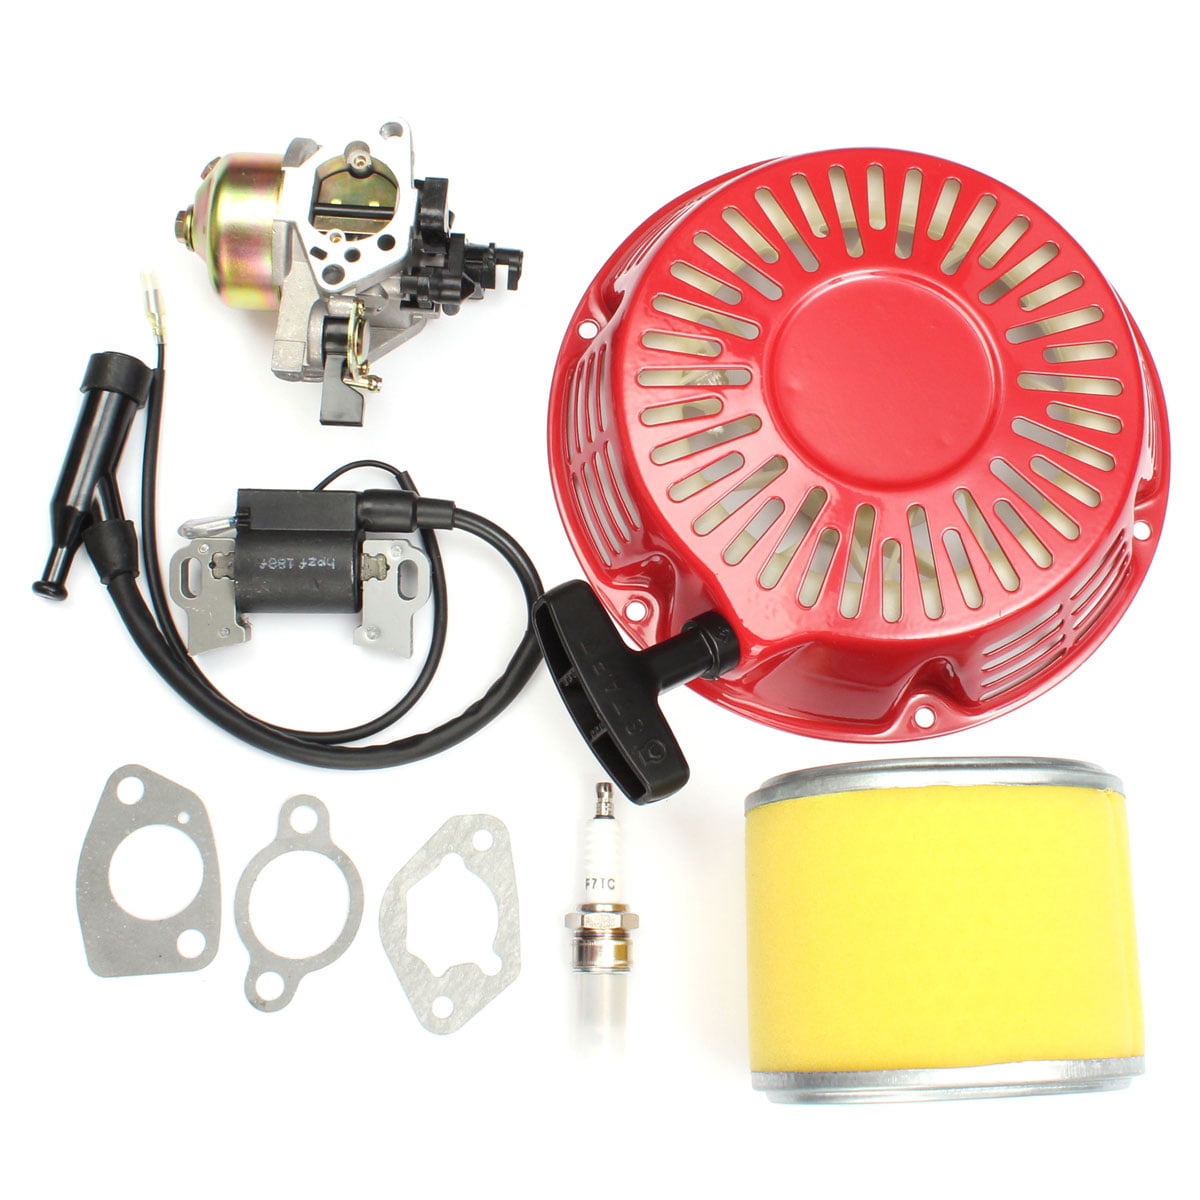 NEW GX390 13HP FOR HONDA CARBURETOR WITH IGNITION COIL SPARK PLUG AND AIR FILTER